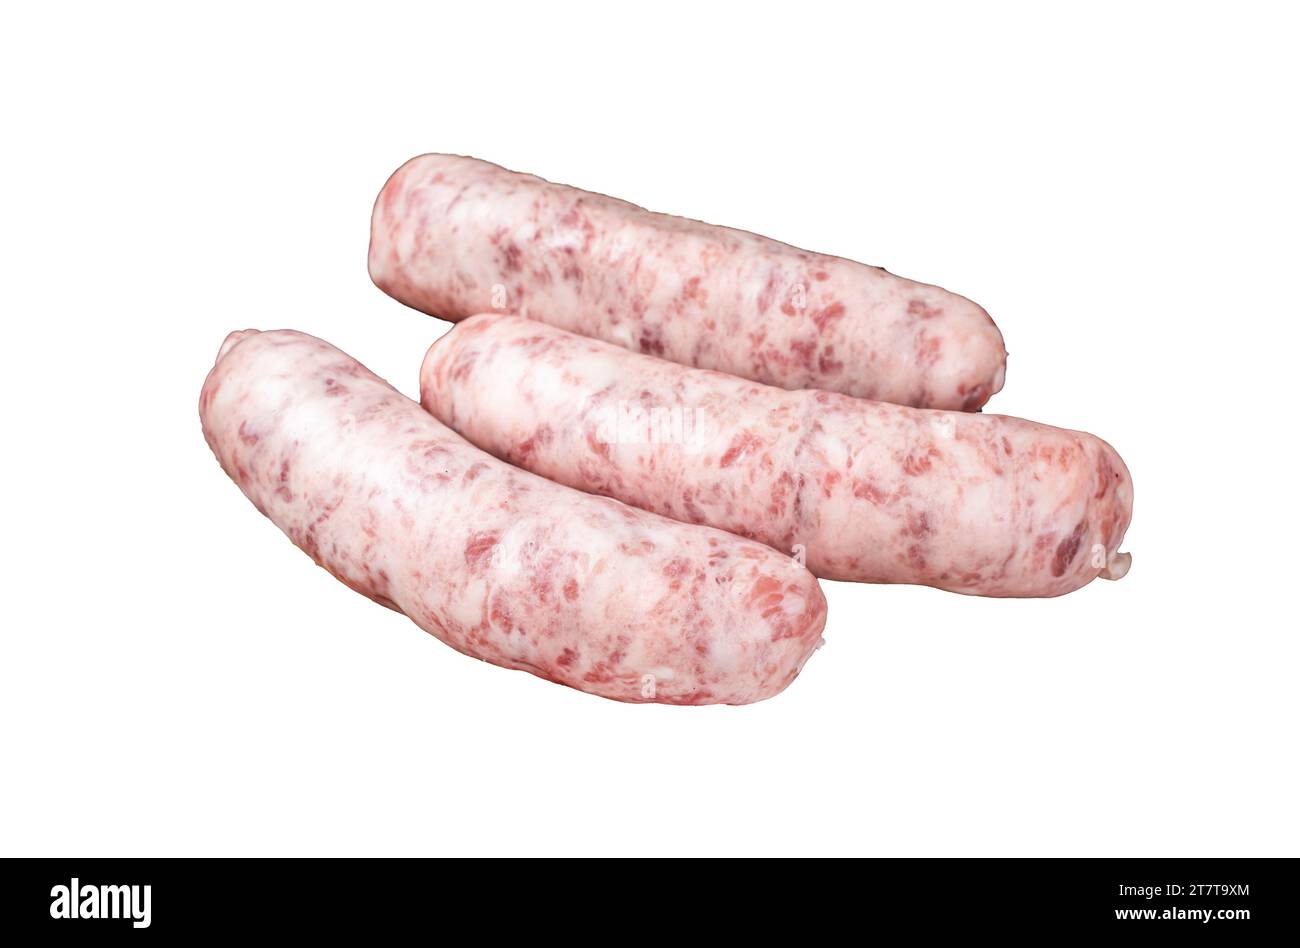 Fresh Raw Bratwurst meat sausages ready for cooking on wooden board. Isolated, white background Stock Photo